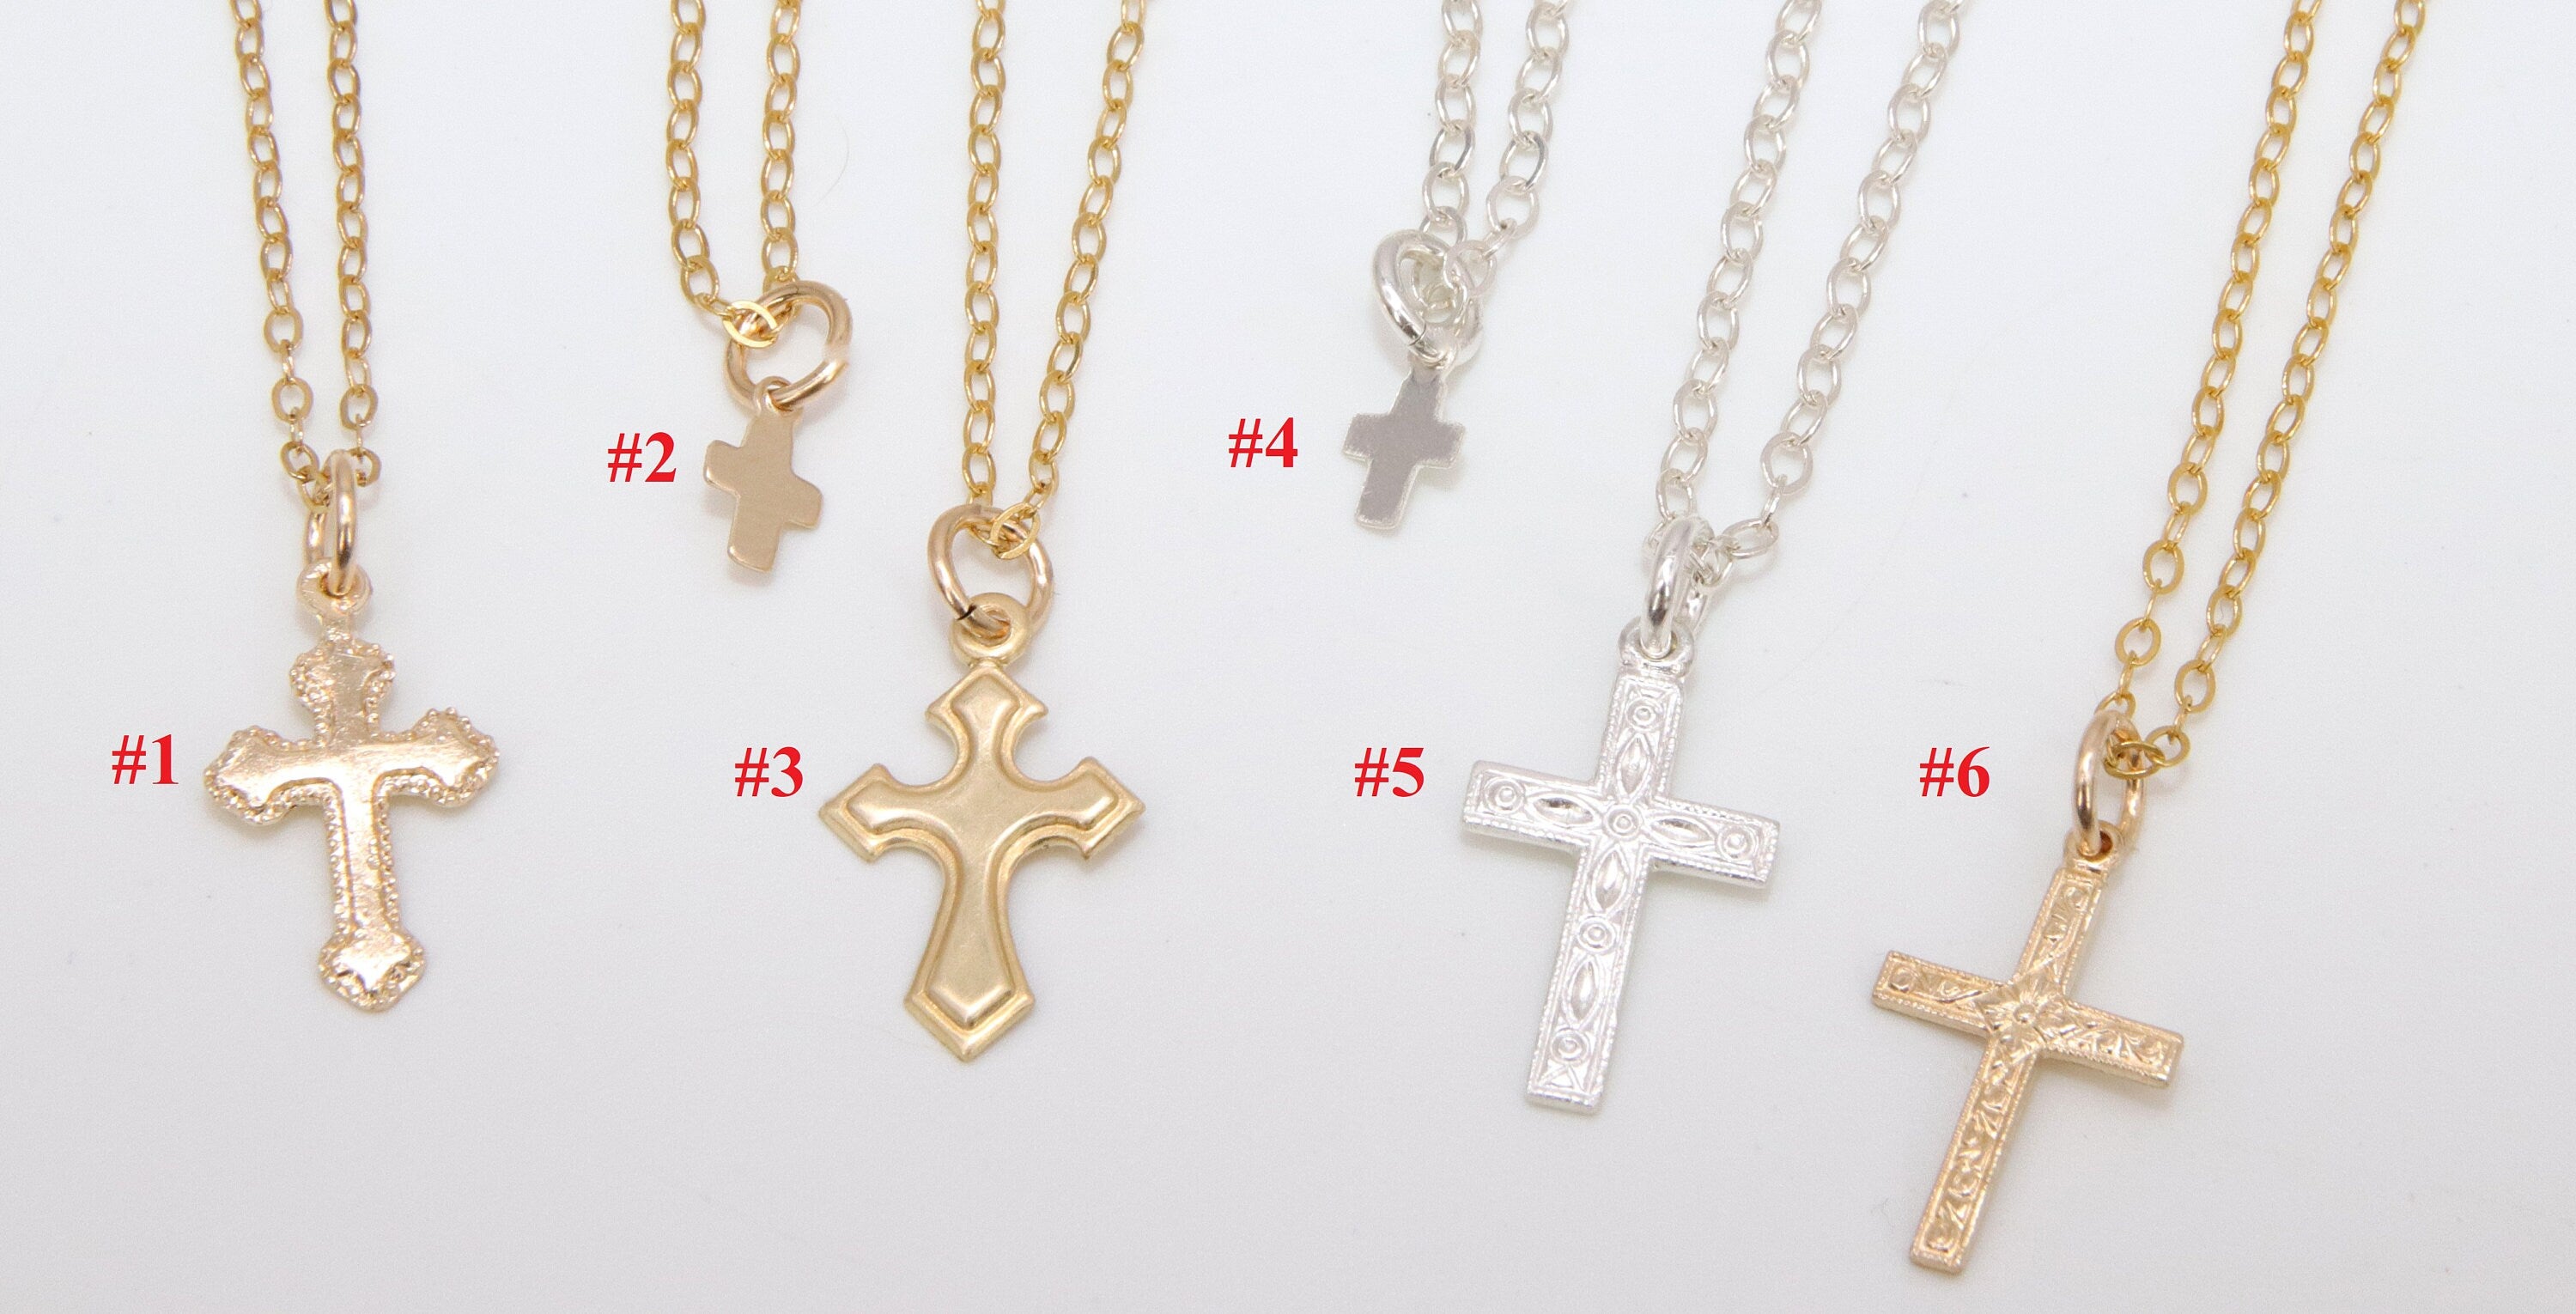 14k Gold Cross Necklaces | Religion Necklaces | 925 Sterling Silver Cross Necklace